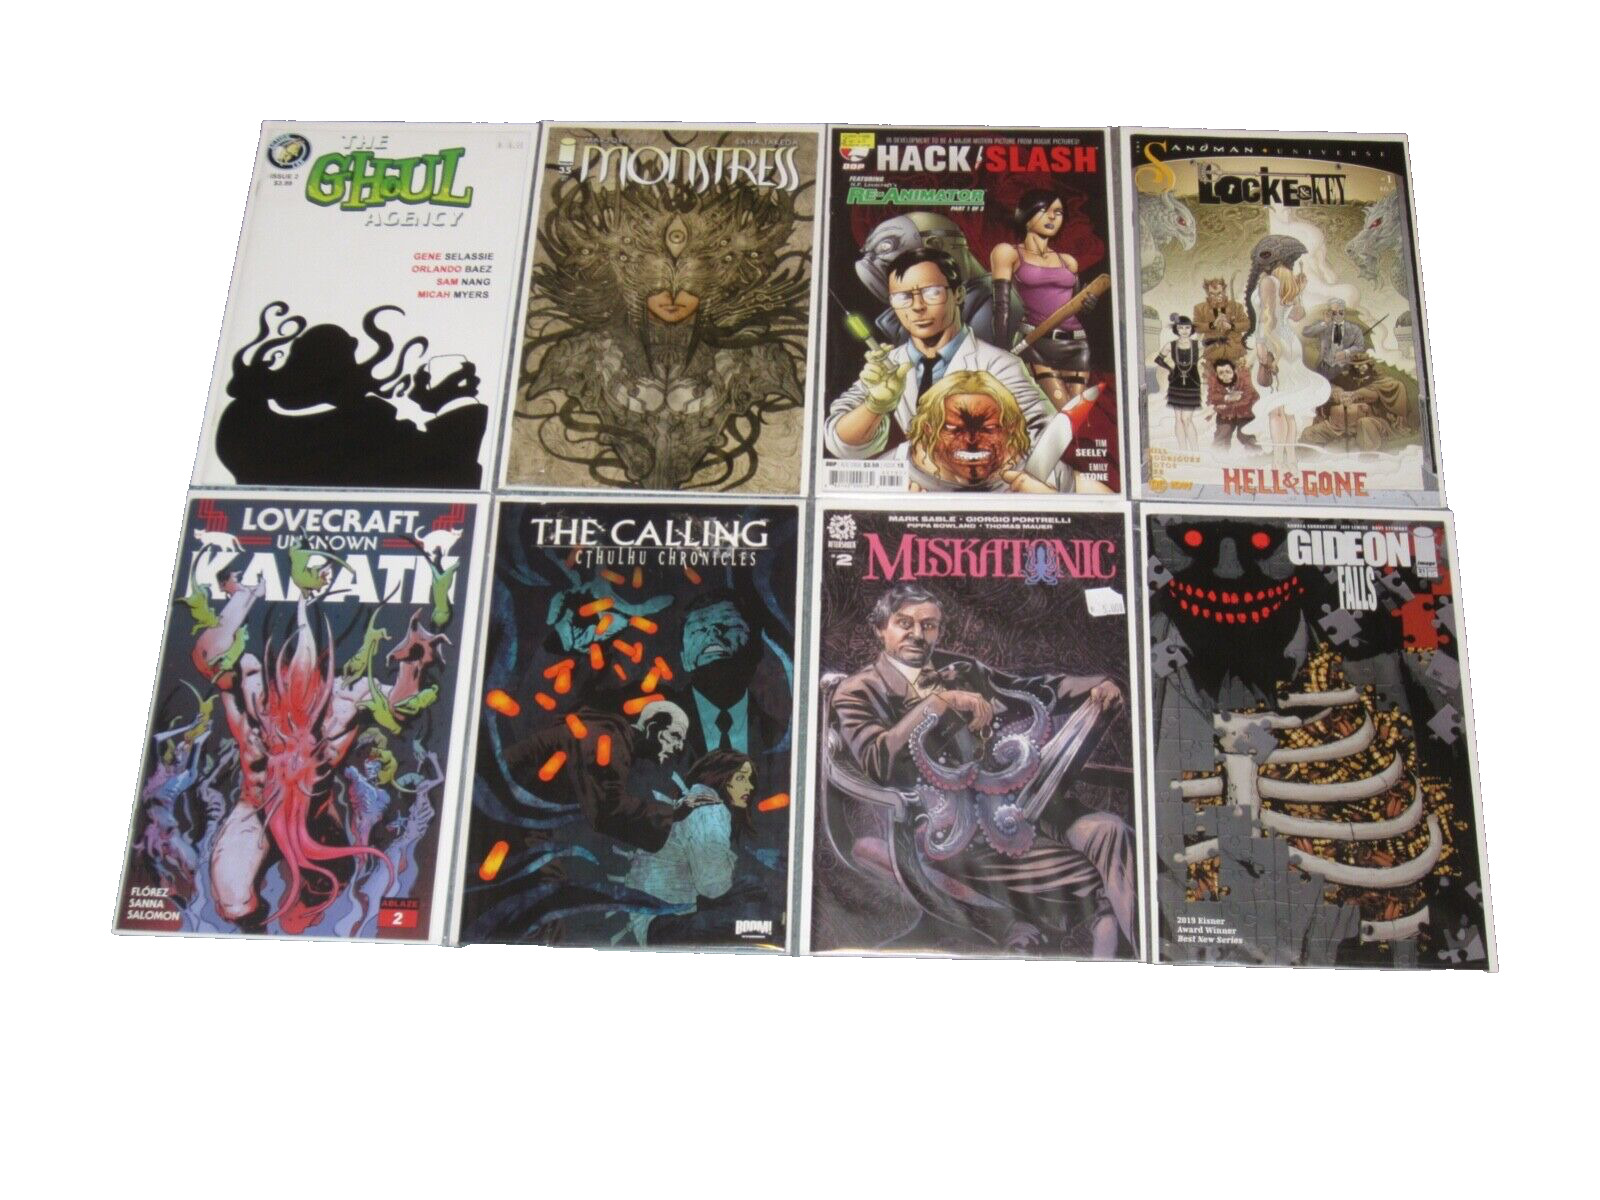 EPIC LOT OF 15 CTHULHU & OTHER H.P. LOVECRAFT THEMED COMIC BOOKS HORROR VF+ AVG